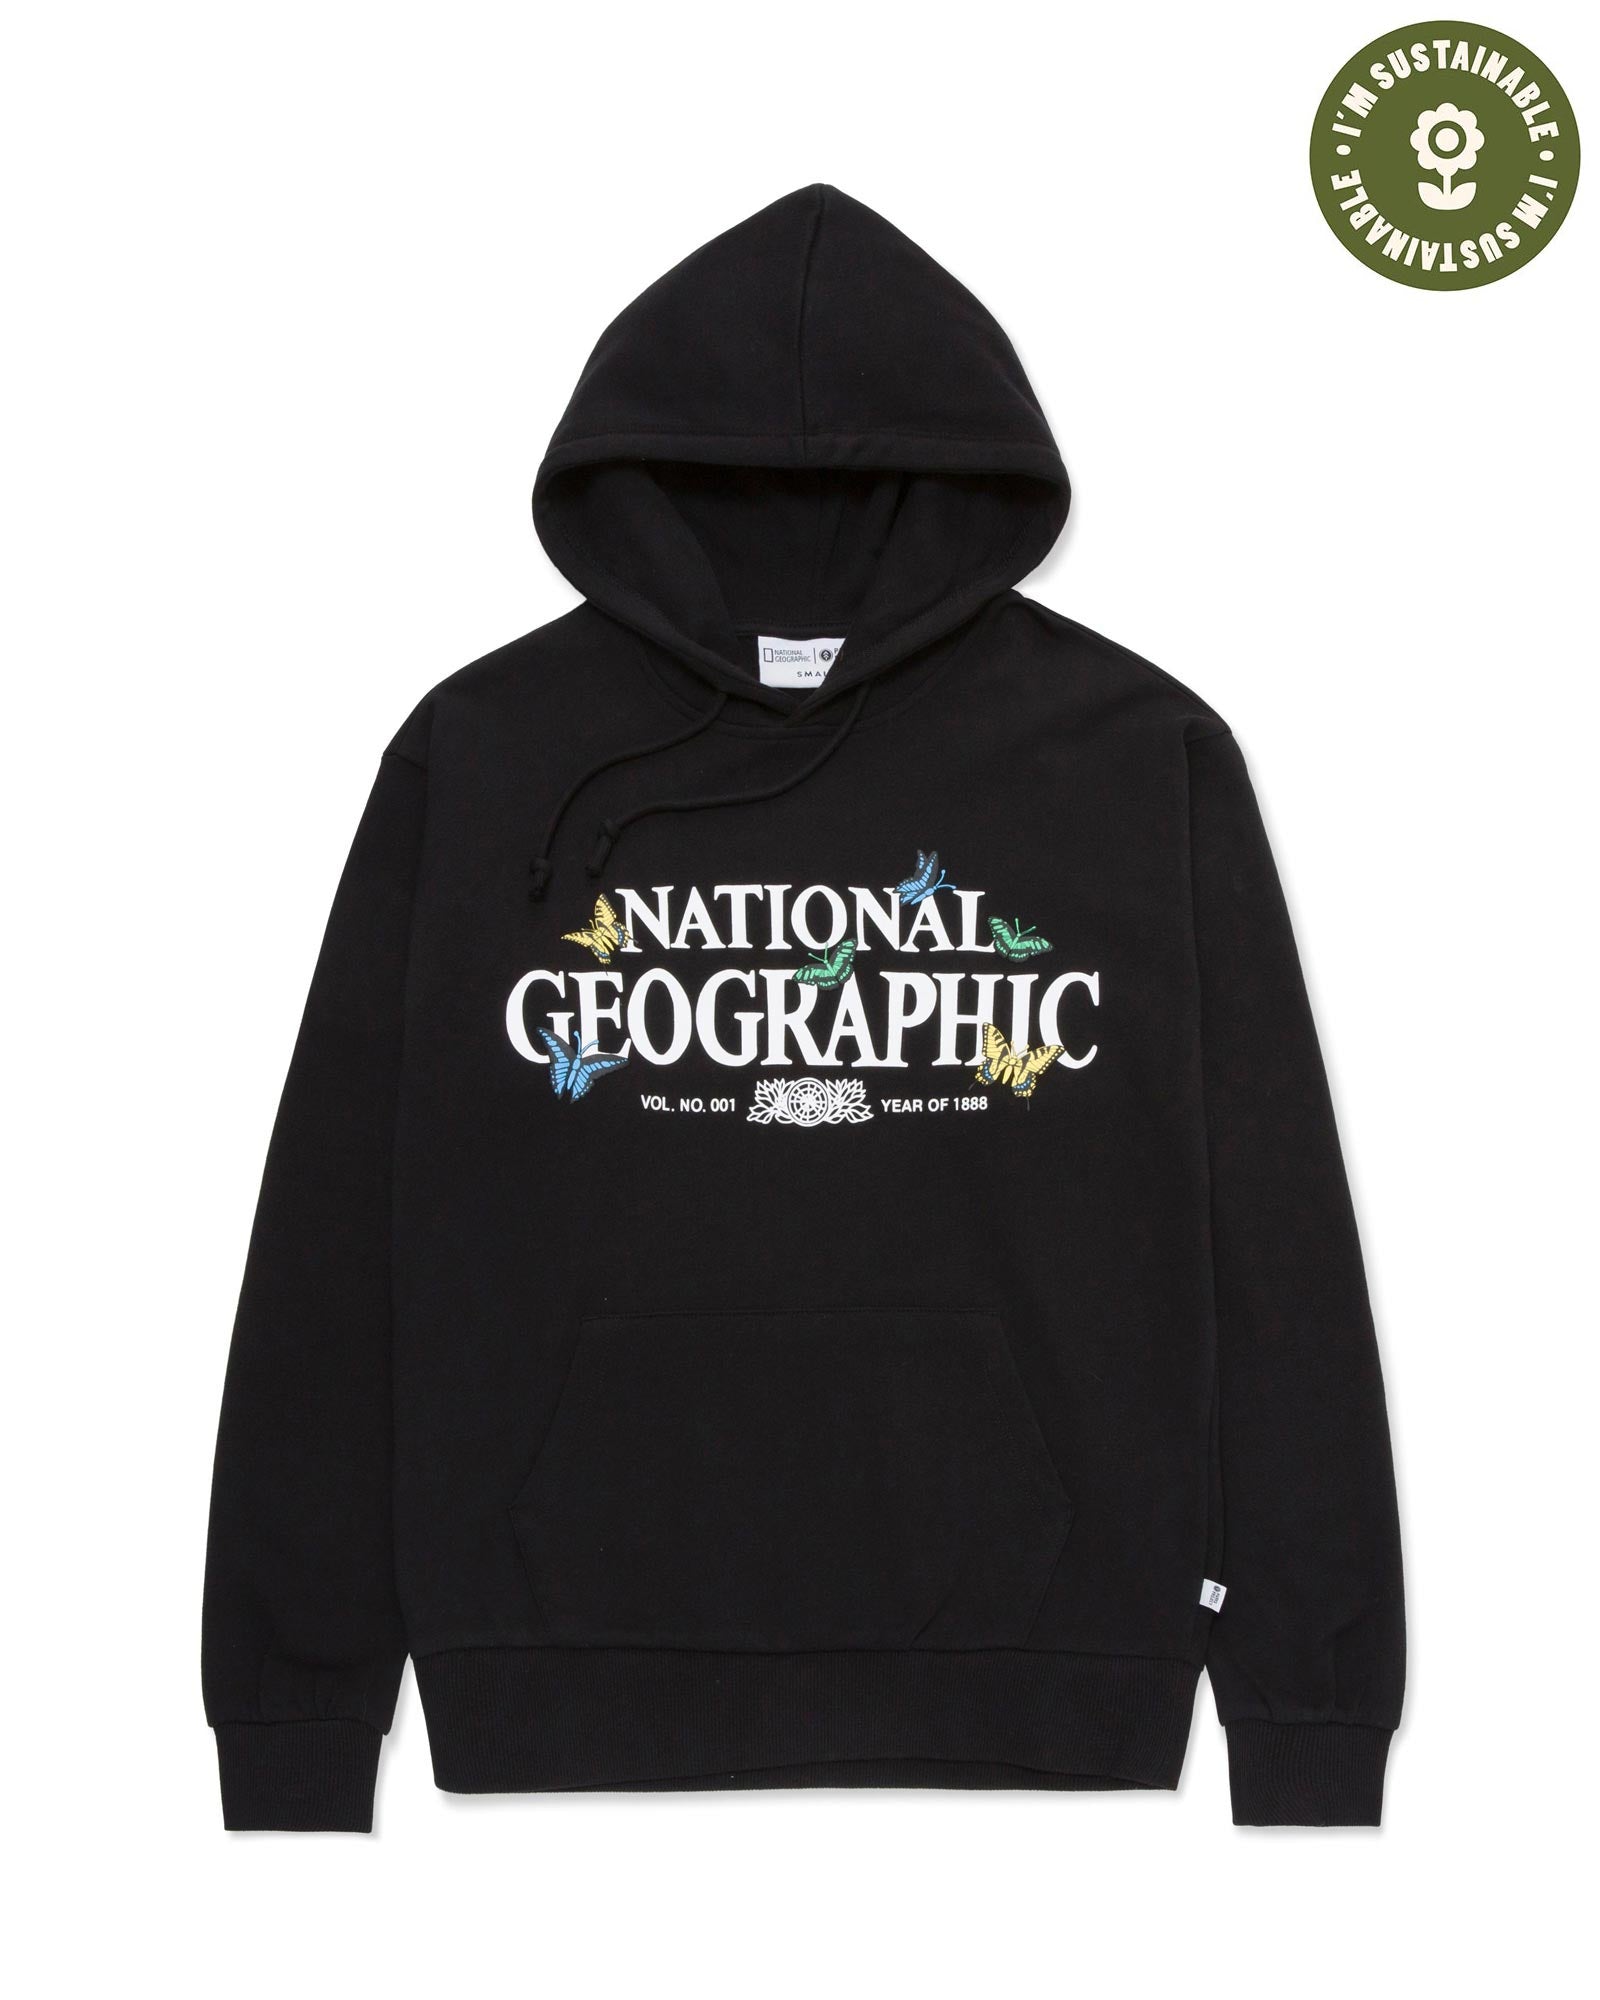 National Geographic x Parks Project Night Butterflies Organic Hoodie